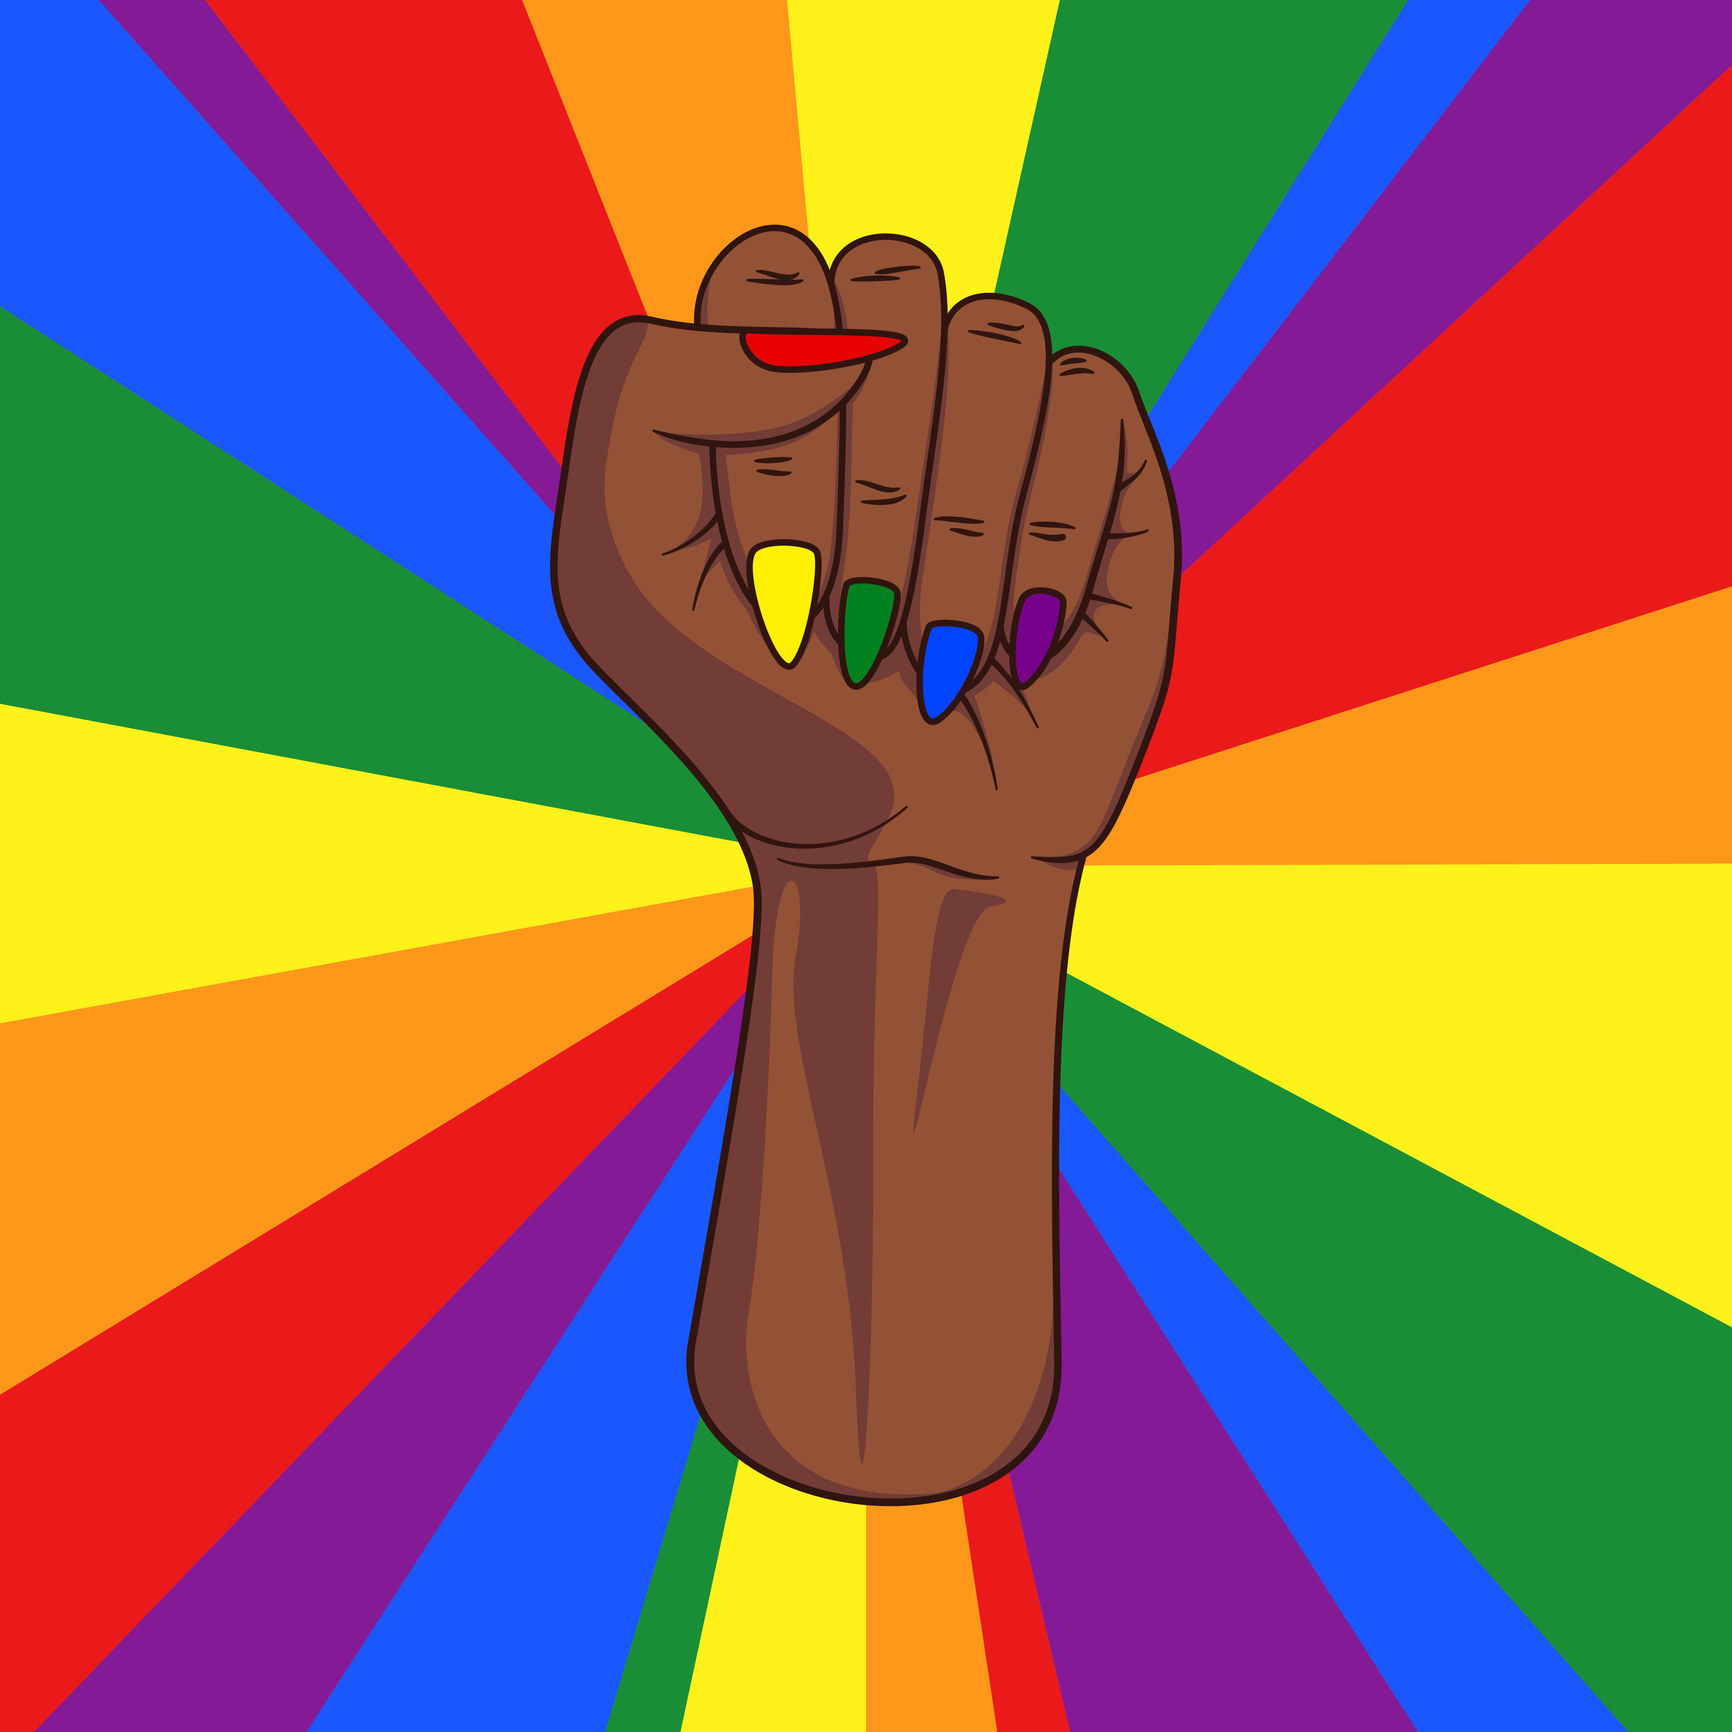 A Black hand adorned with rainbow-colored nails forms the Black power symbol over a rainbow background